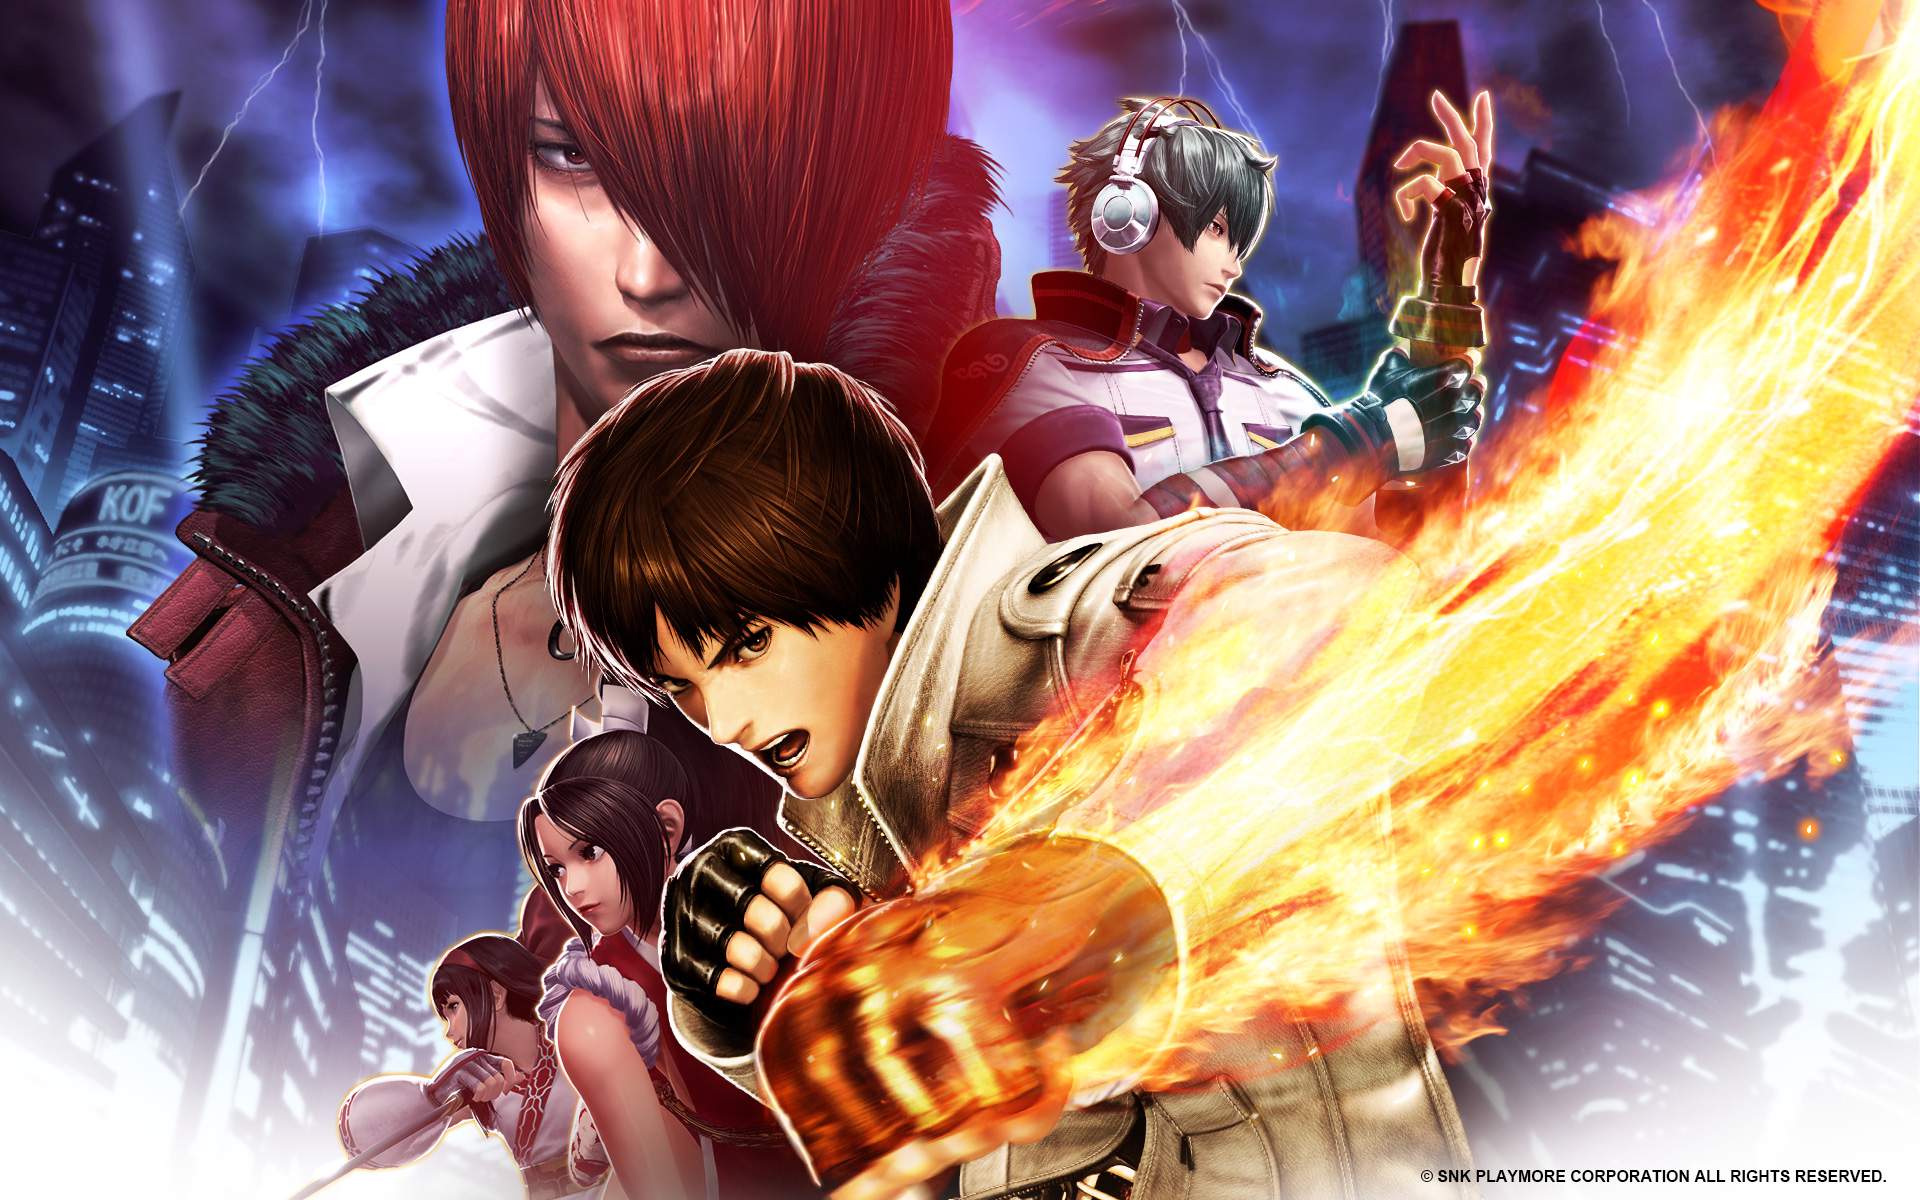 The King of Fighters XIV': 5 Fast Facts You Need to Know